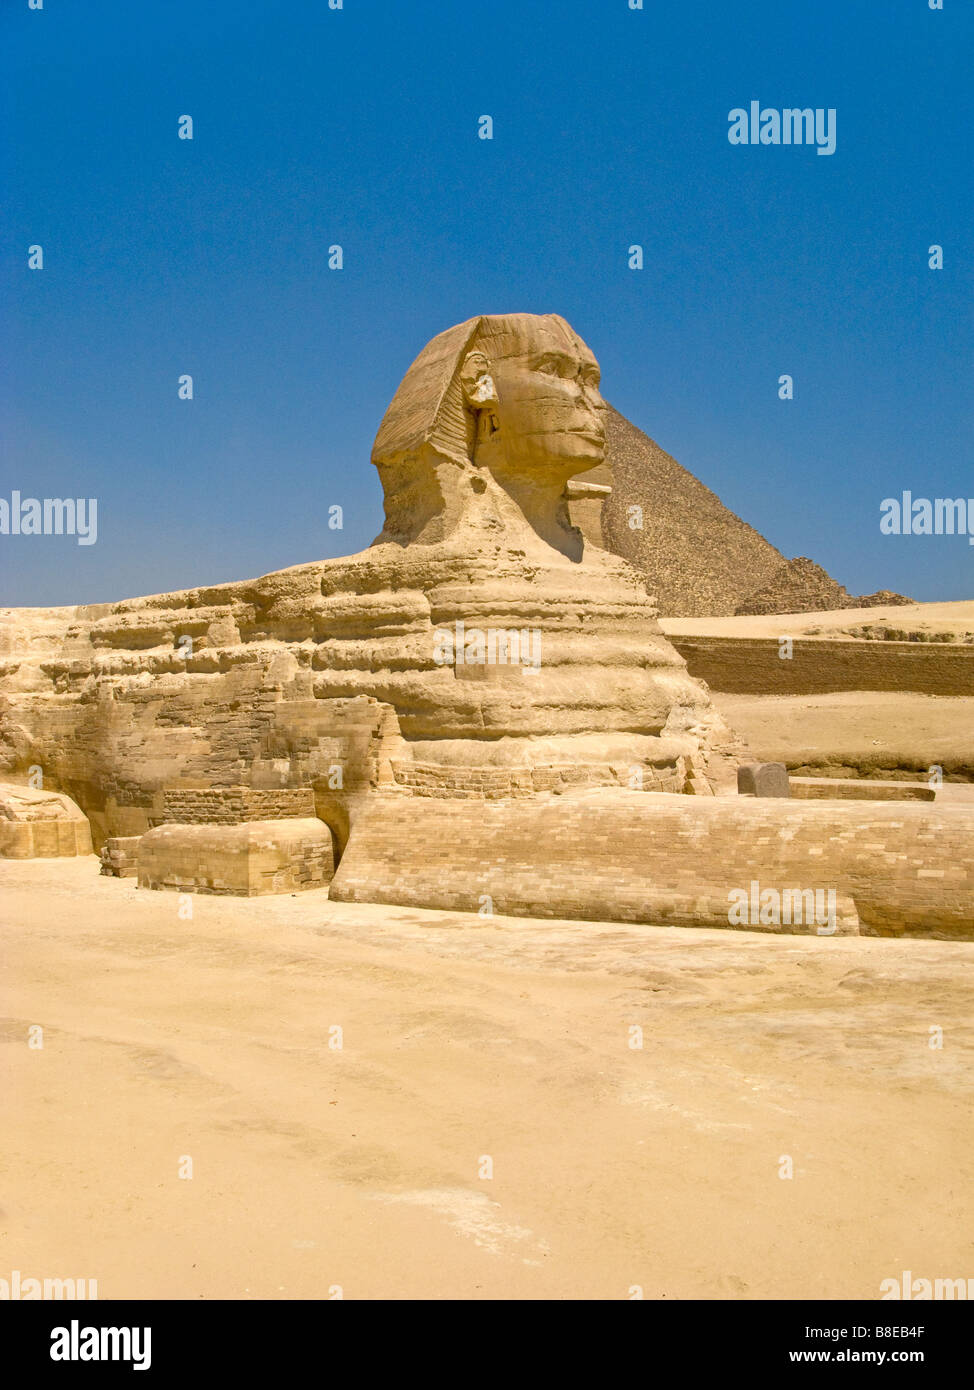 The Great Sphinx at Giza in Egypt Stock Photo - Alamy